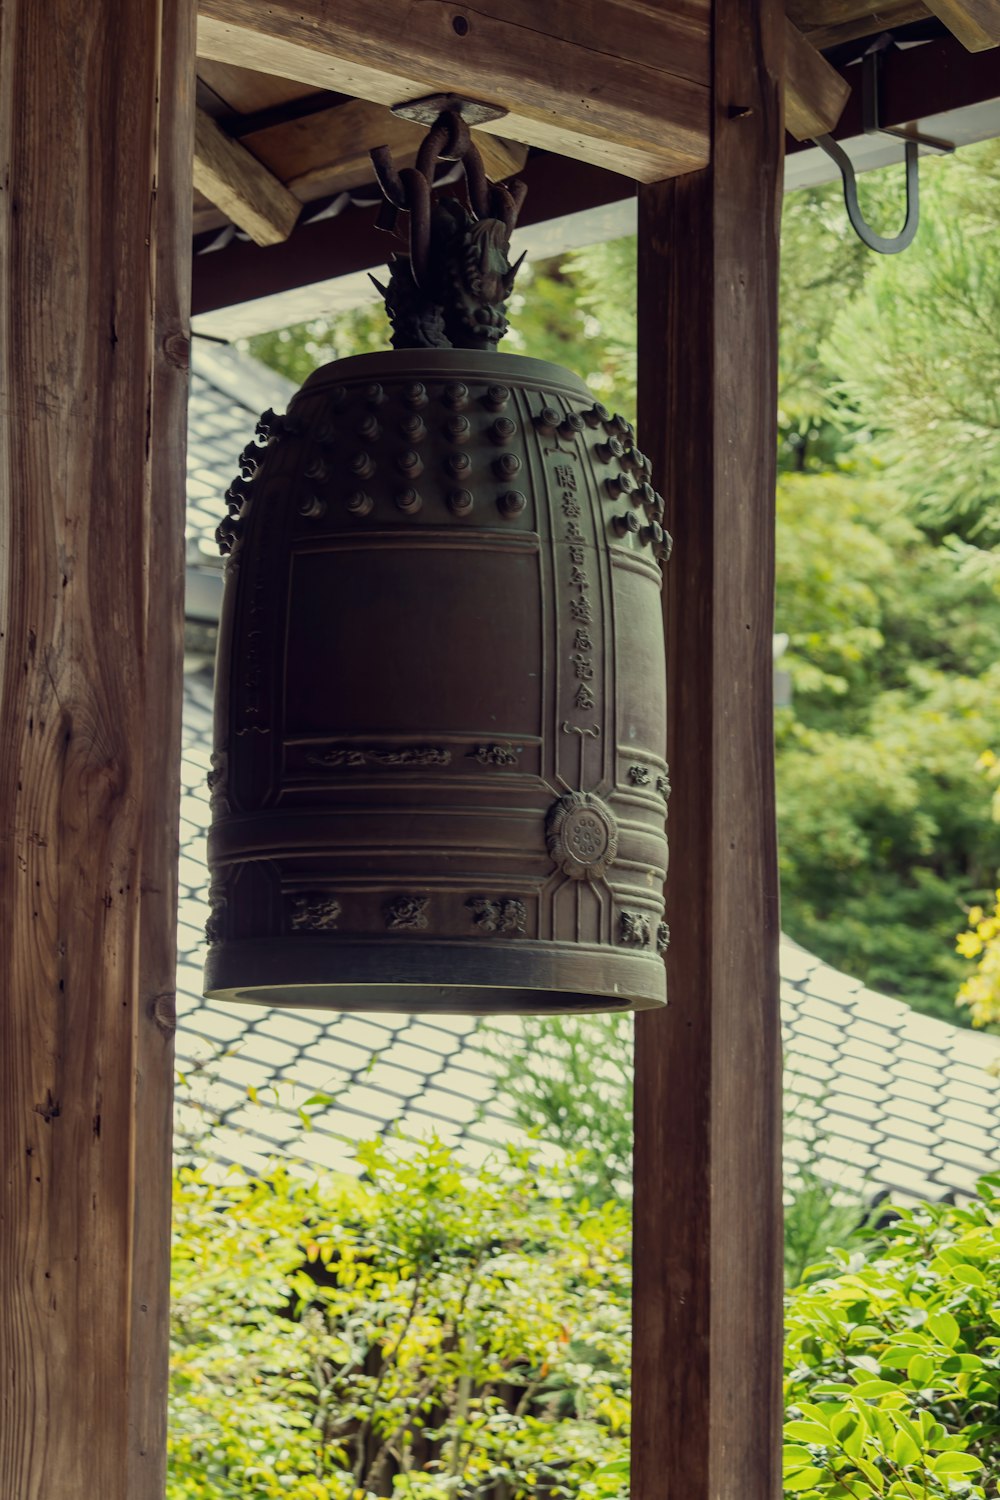 a large bell hanging from a wooden structure